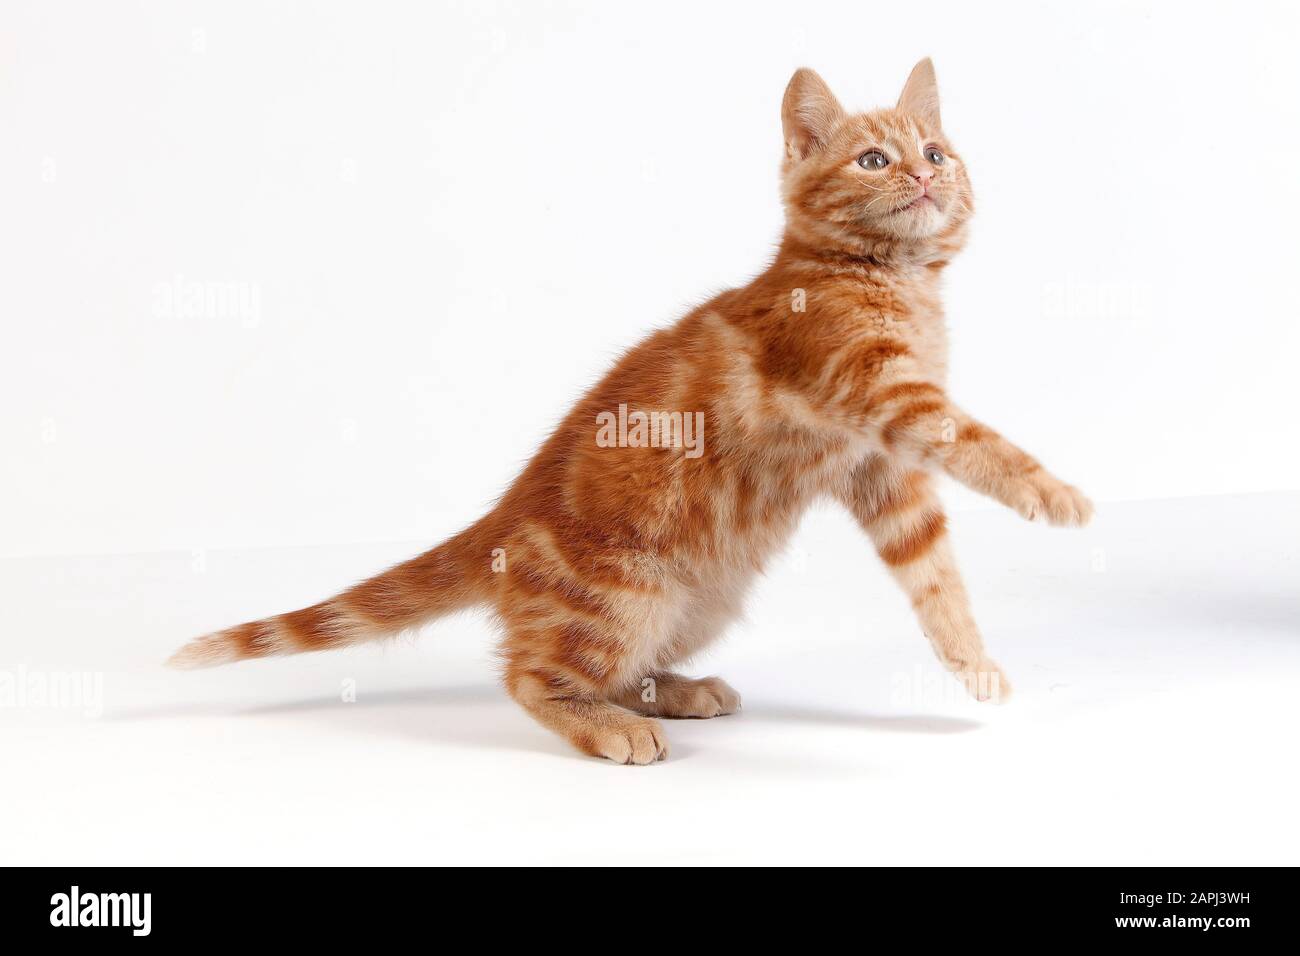 Red Domestic Cat, Kitten playing against White Background Stock Photo